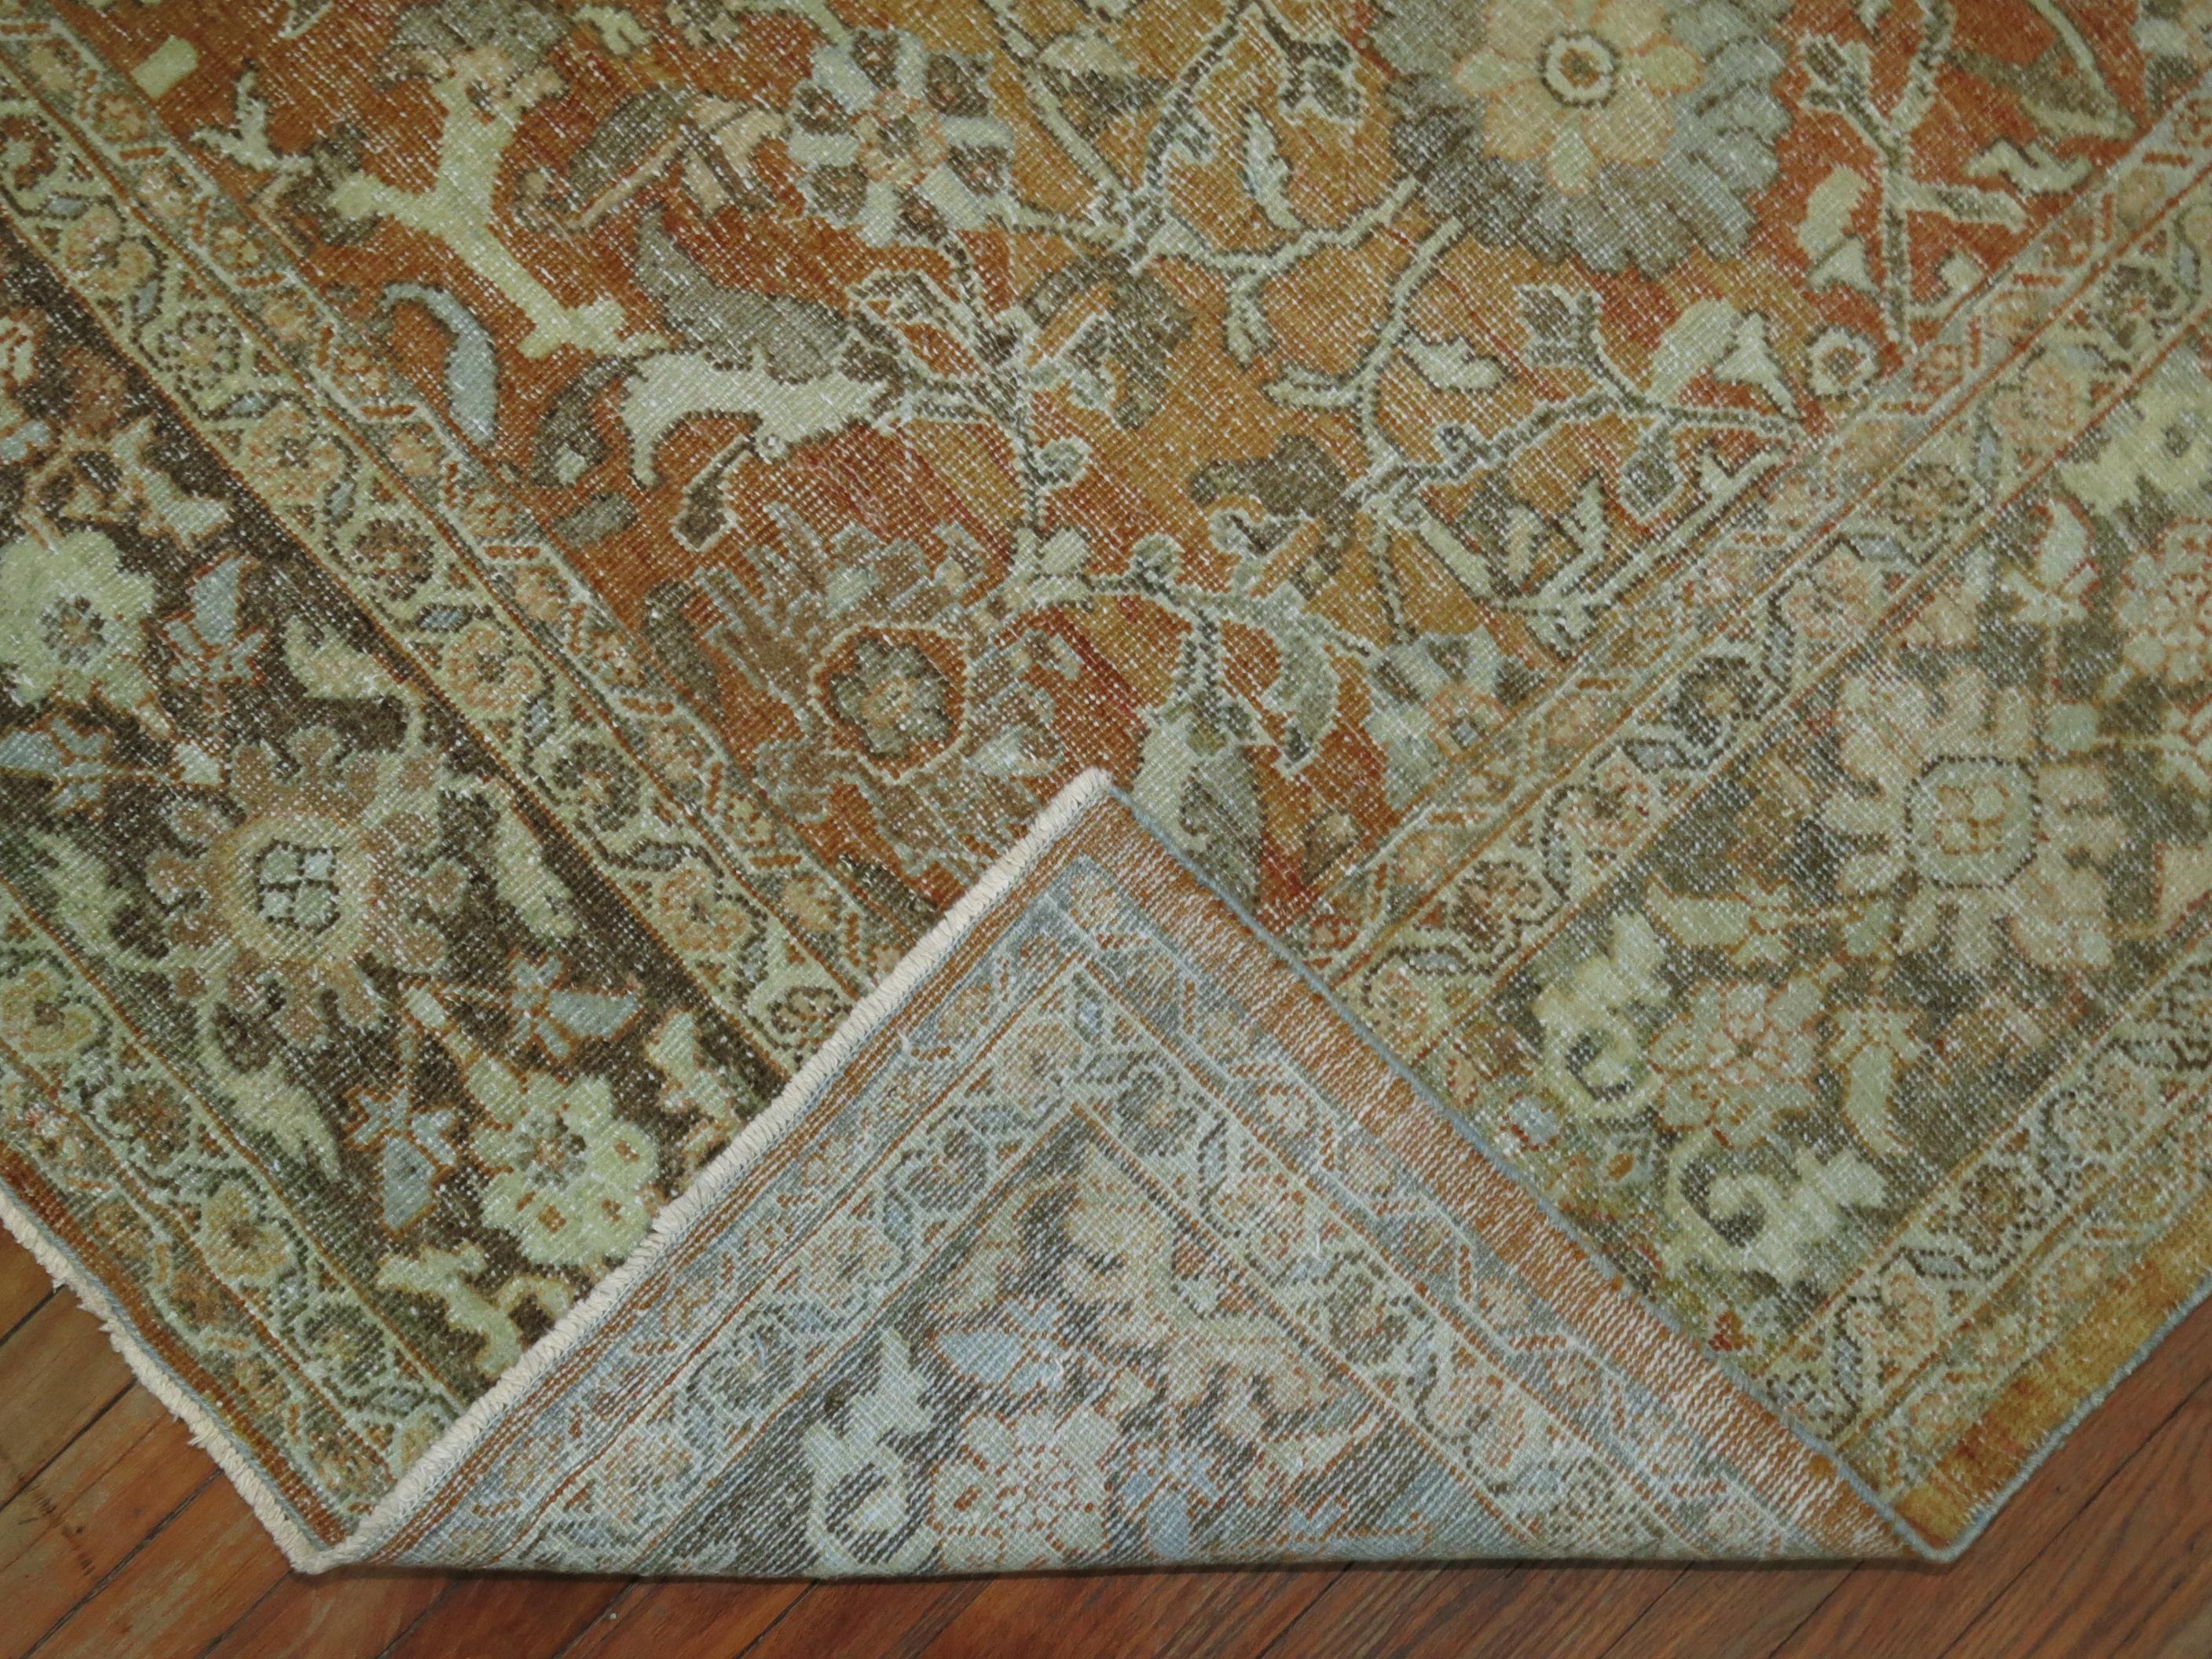 20th Century Terracotta Traditional Persian Room Size Decorative Hand-Woven Rug